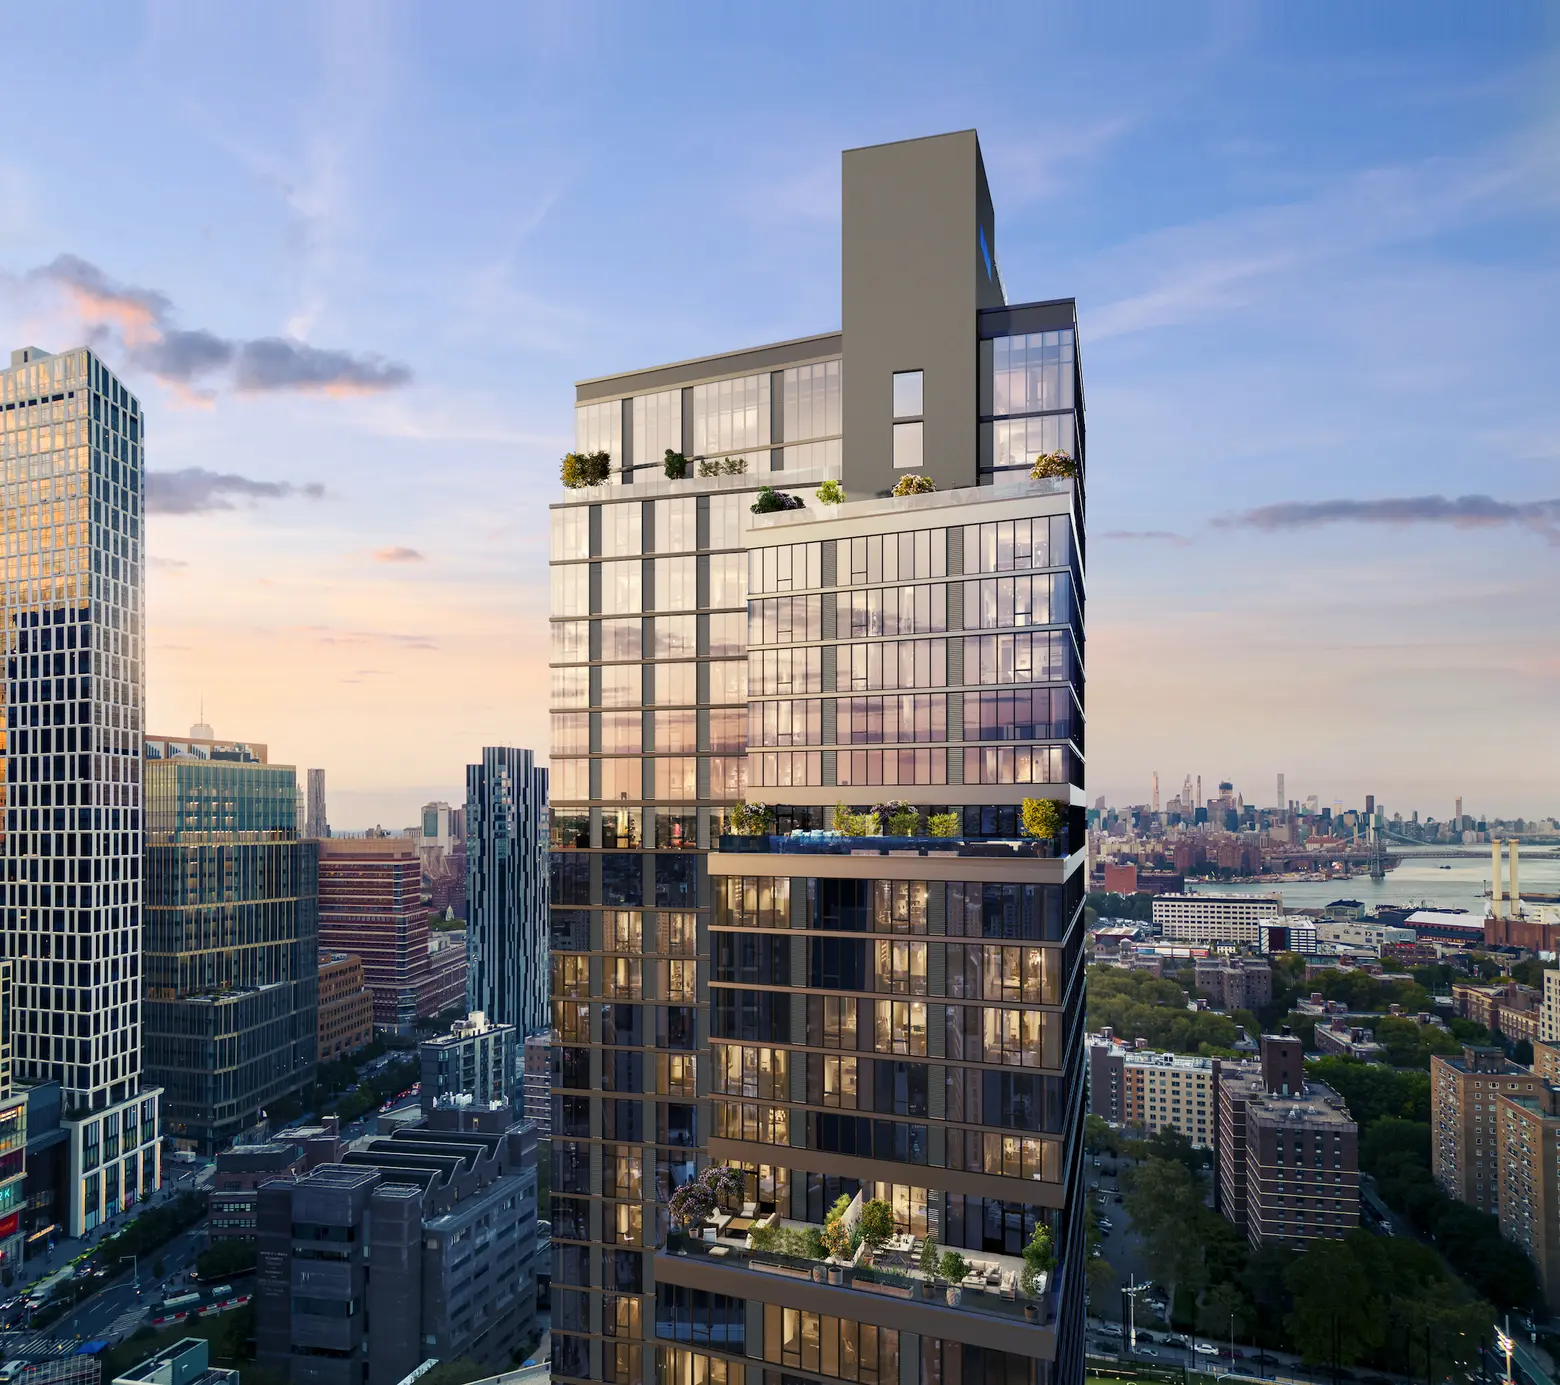 All-electric 30-story tower with 324 apartments and academic space breaks ground in Downtown Brooklyn